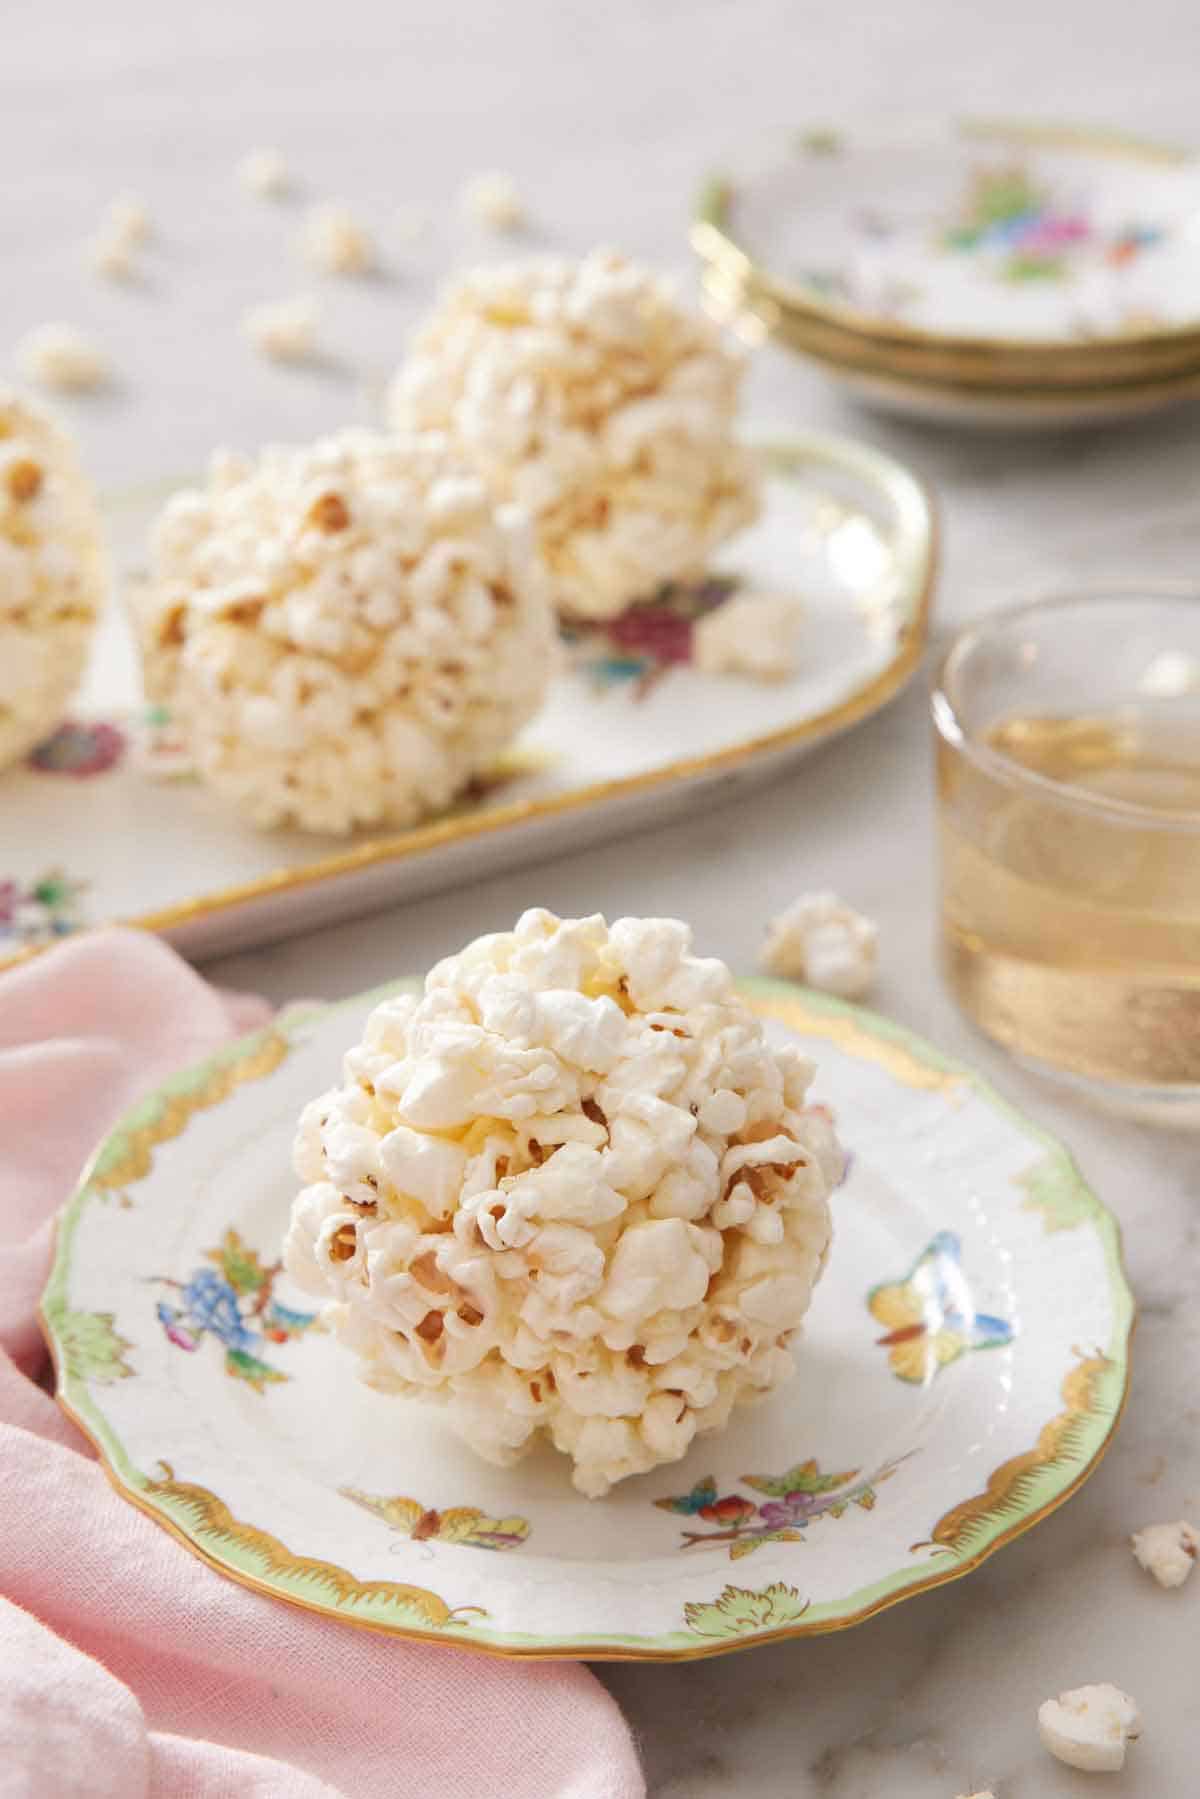 A popcorn ball on a plate with more balls in the background on a platter.